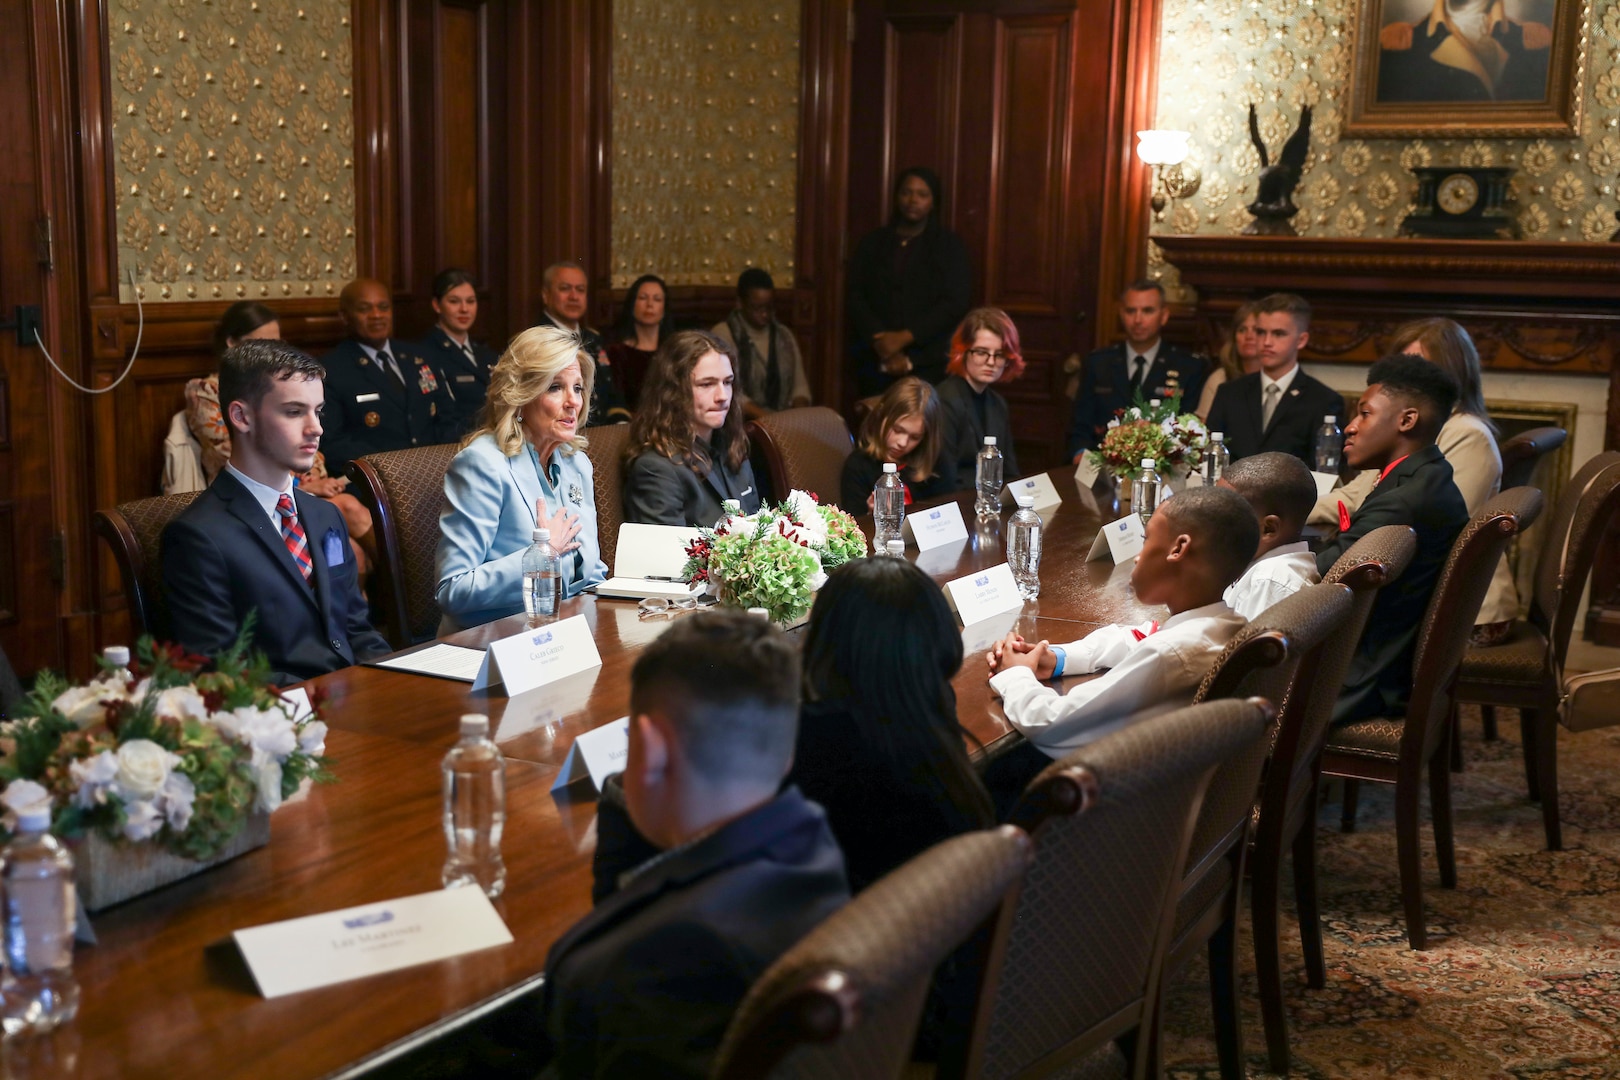 First lady Jill Biden welcomes National Guard senior leaders and family members for a roundtable discussion on support for National Guard children in the Eisenhower Executive Office Building in Washington Nov. 27, 2023. Attendees, including Guard children, and adjutants general, also joined the first lady’s presentation of the 2023 White House “Magic, Wonder & Joy” holiday theme and decorations.